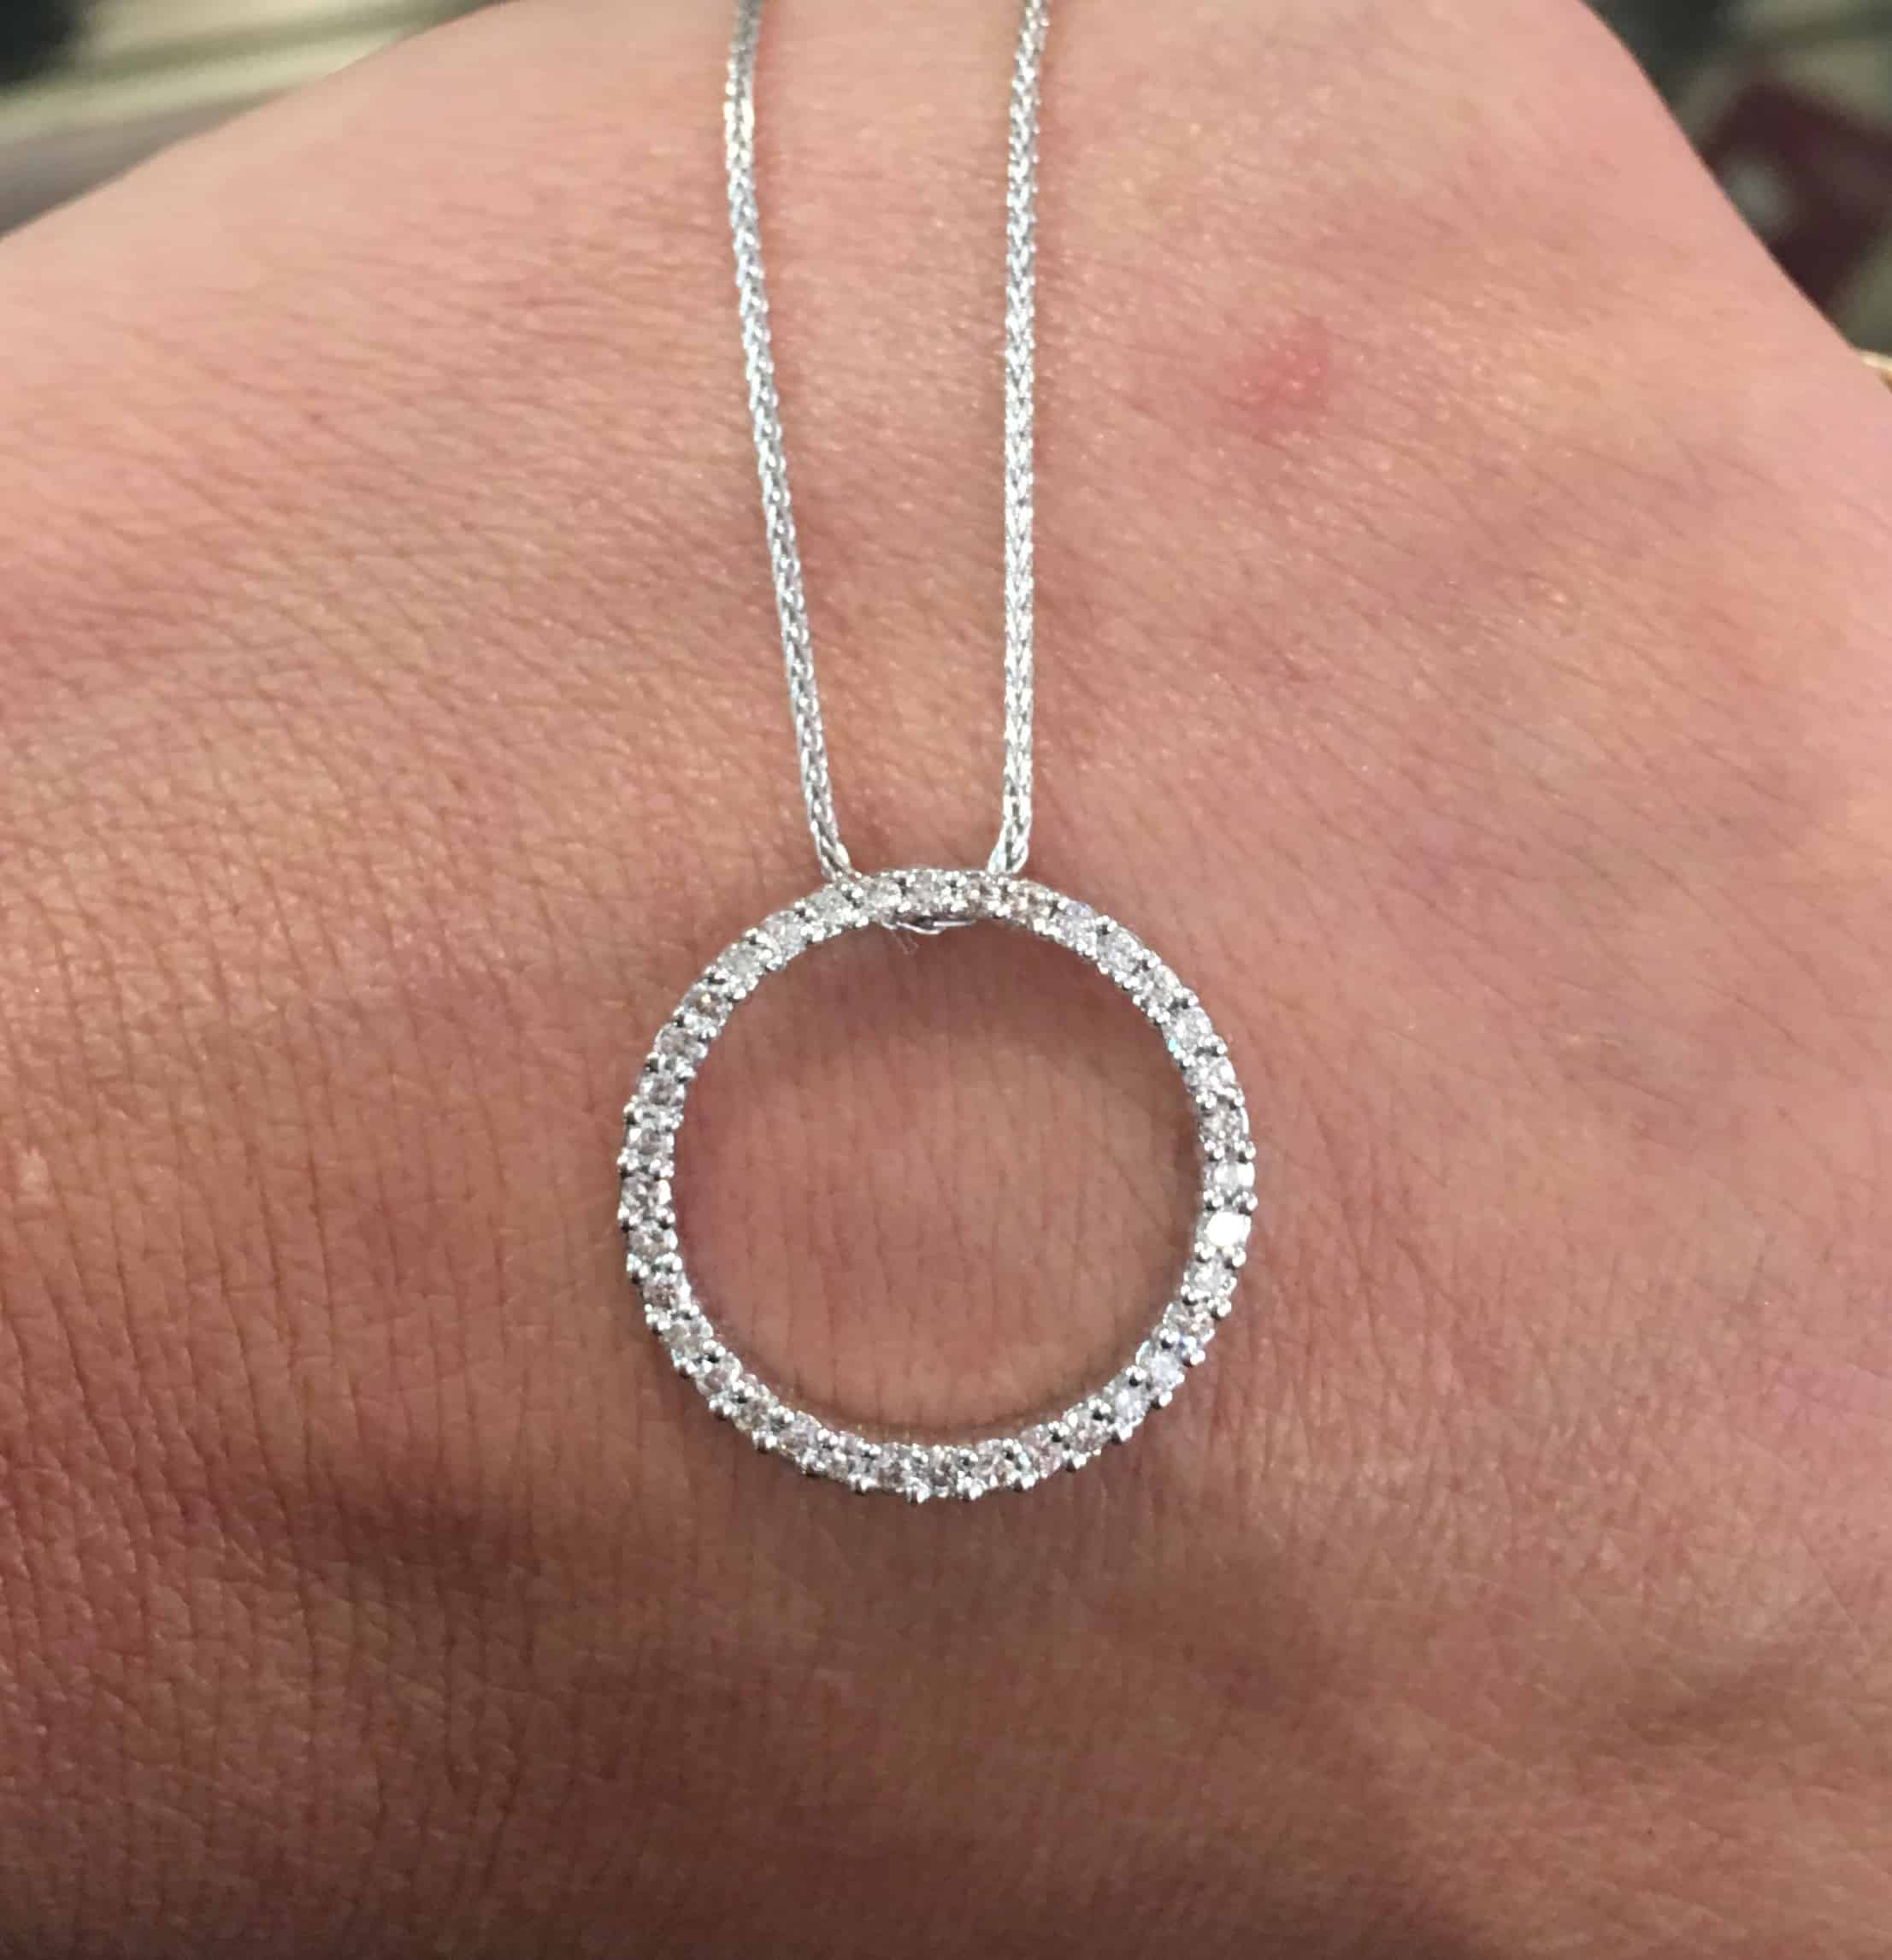 This lovely 14kwg circular diamond pendant is a perfect picture of elegance and simplicity.